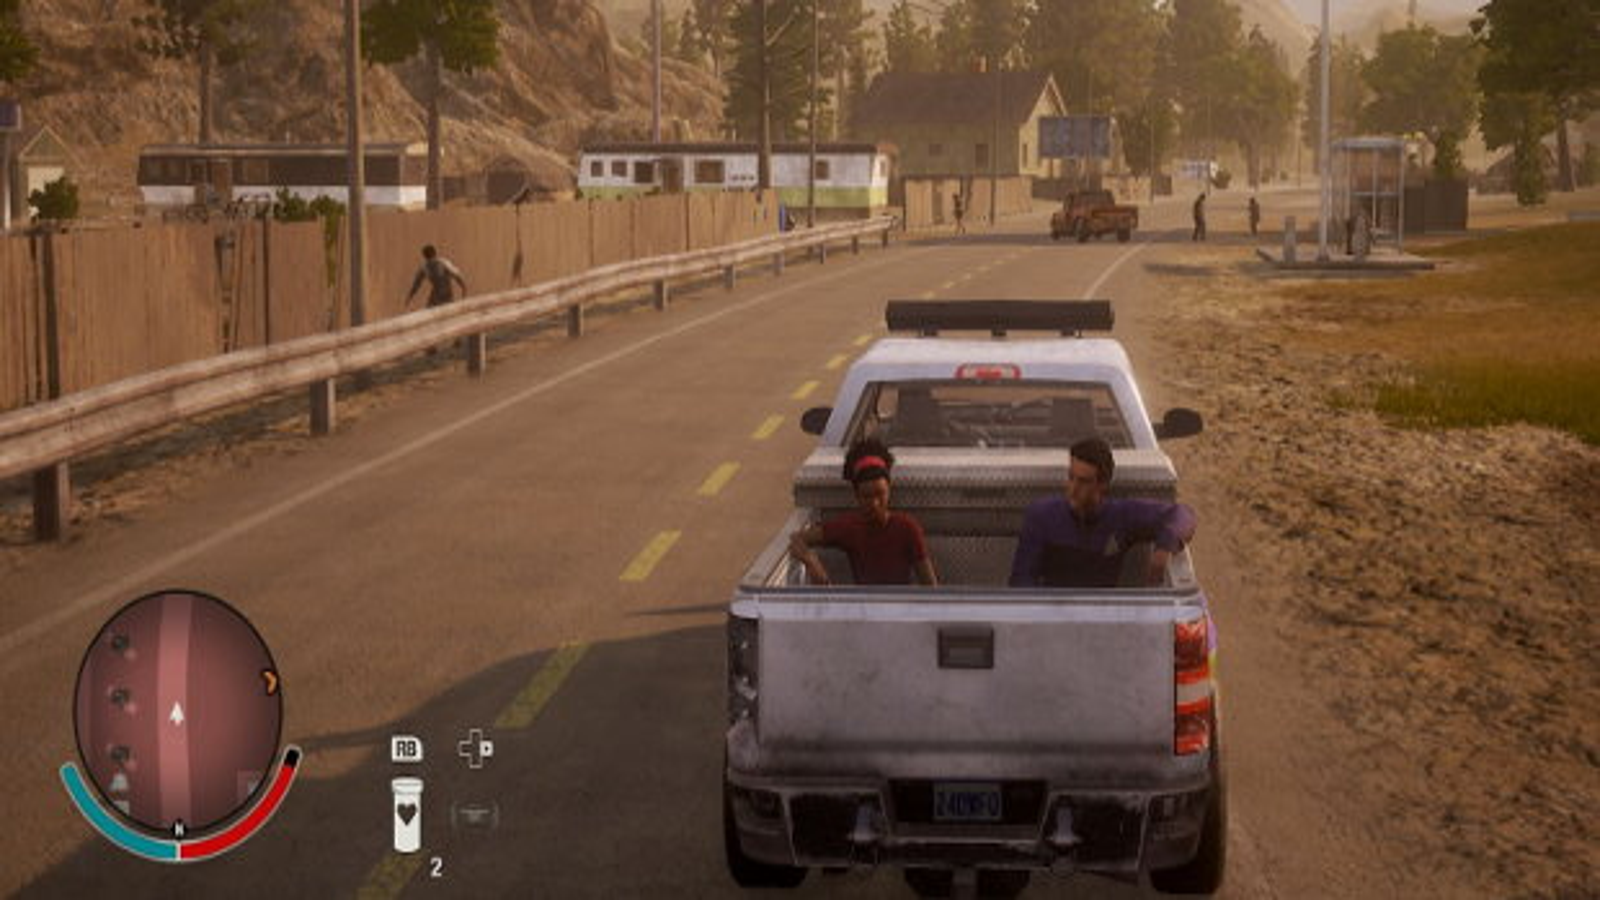 🎮 State of Decay 2 News